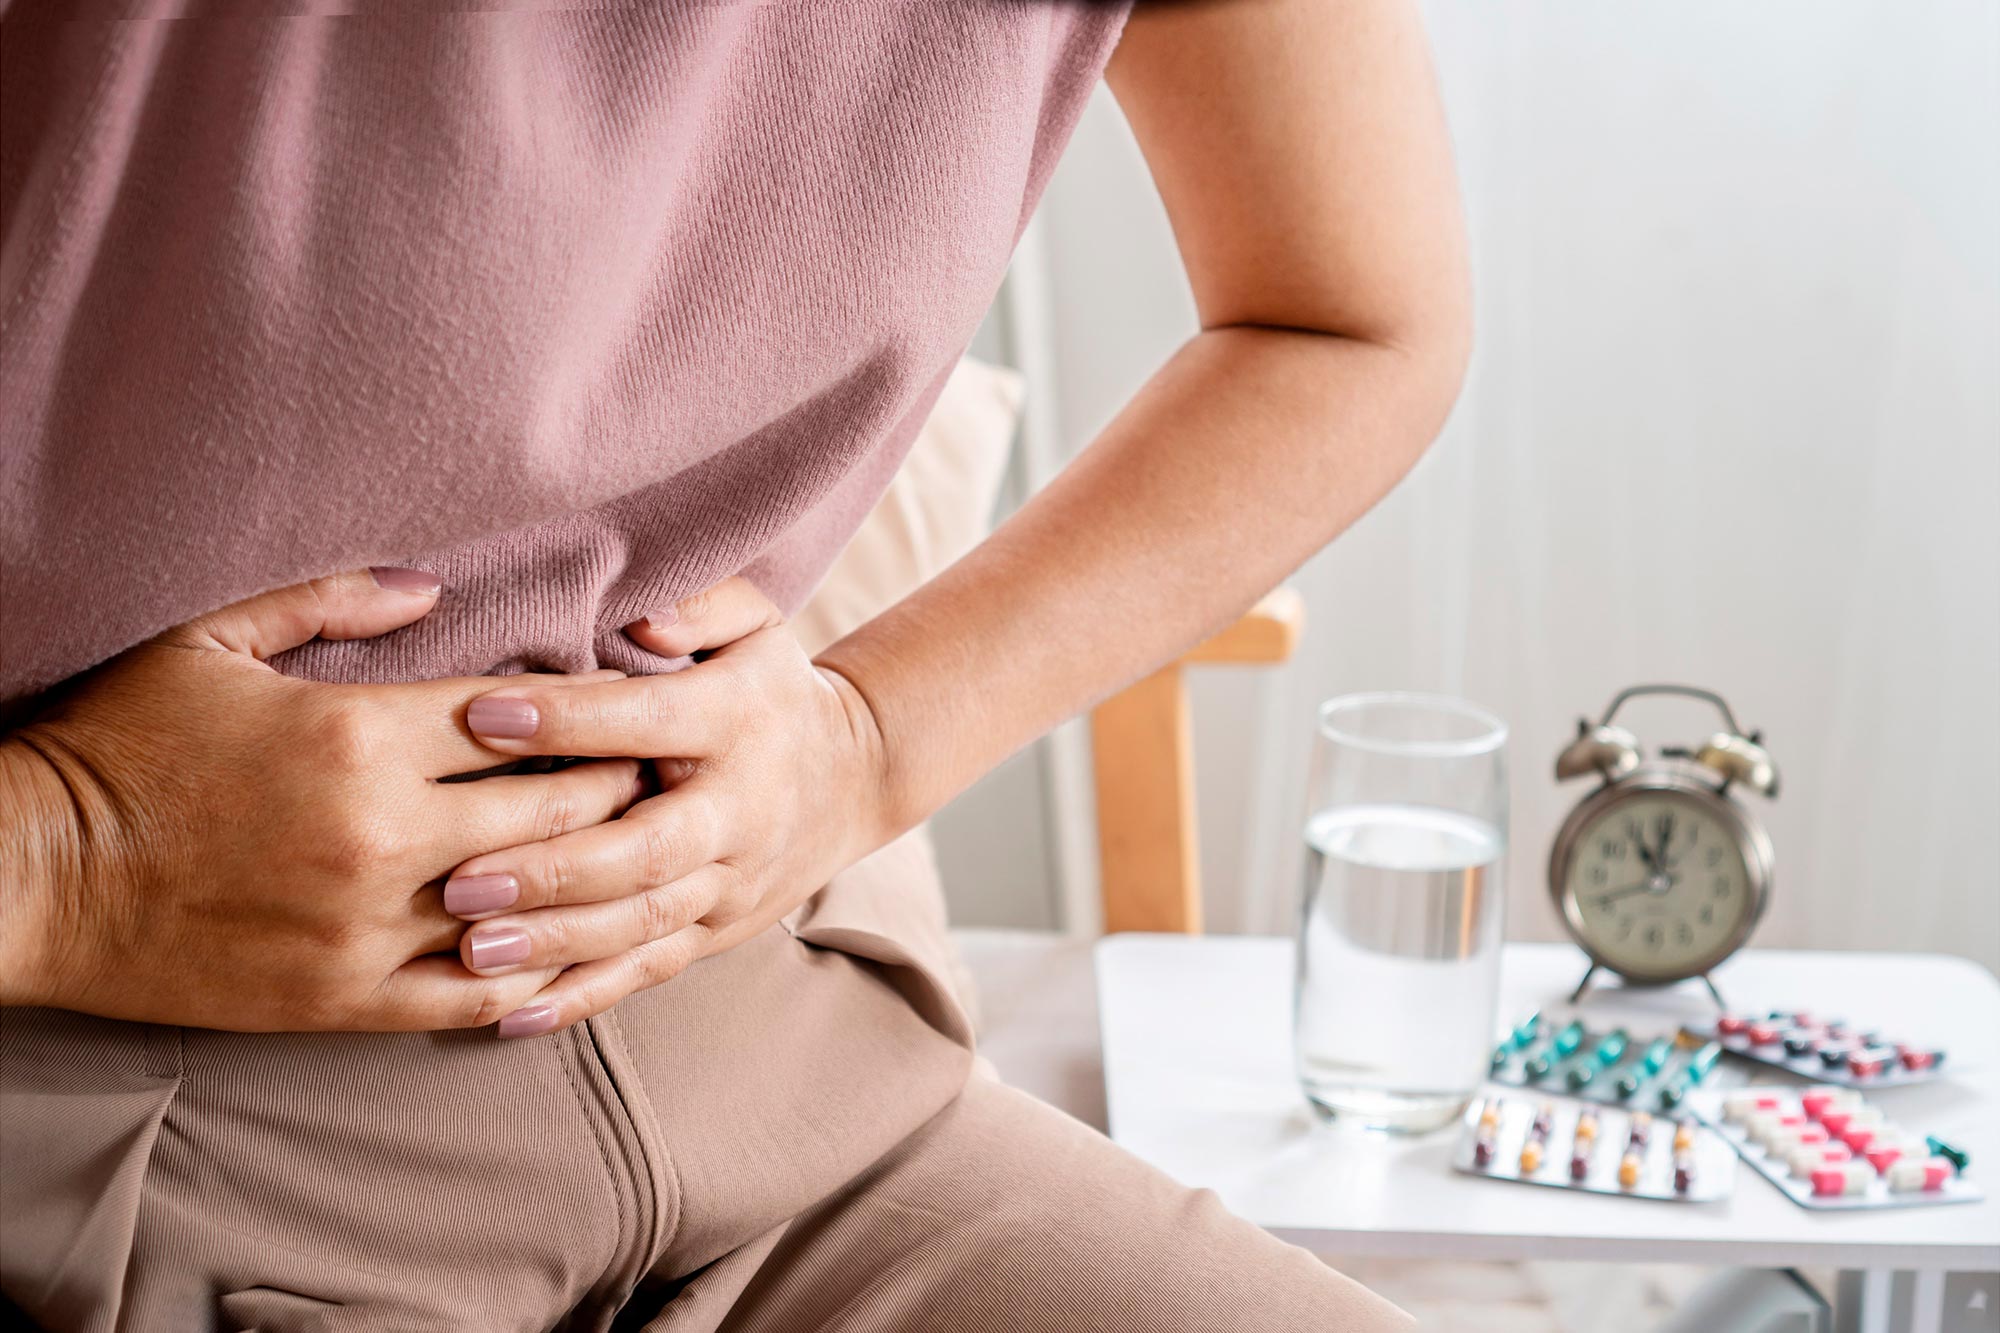 IBS Relief: Common Drug Improves Symptoms of Irritable Bowel Syndrome - SciTechDaily